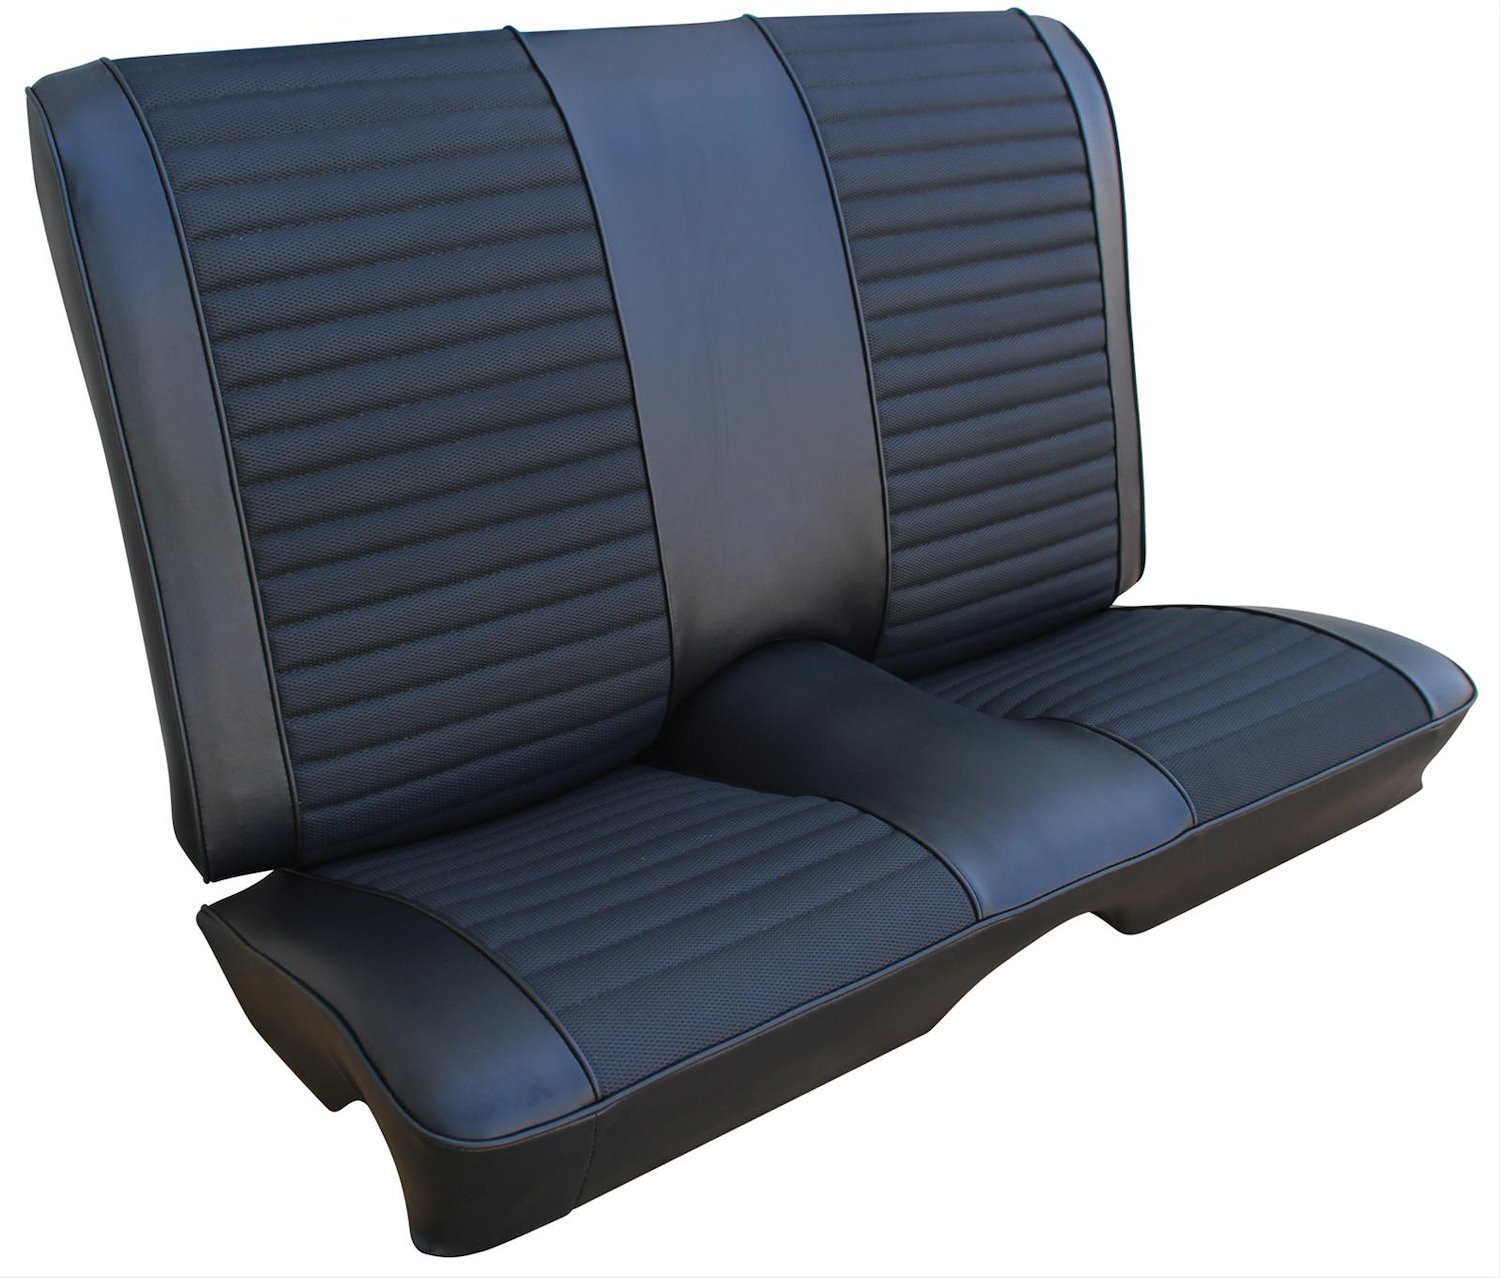 Mach-1-Style Rear Bench Seat 1969-1970 Ford Mustang Convertible [Black]